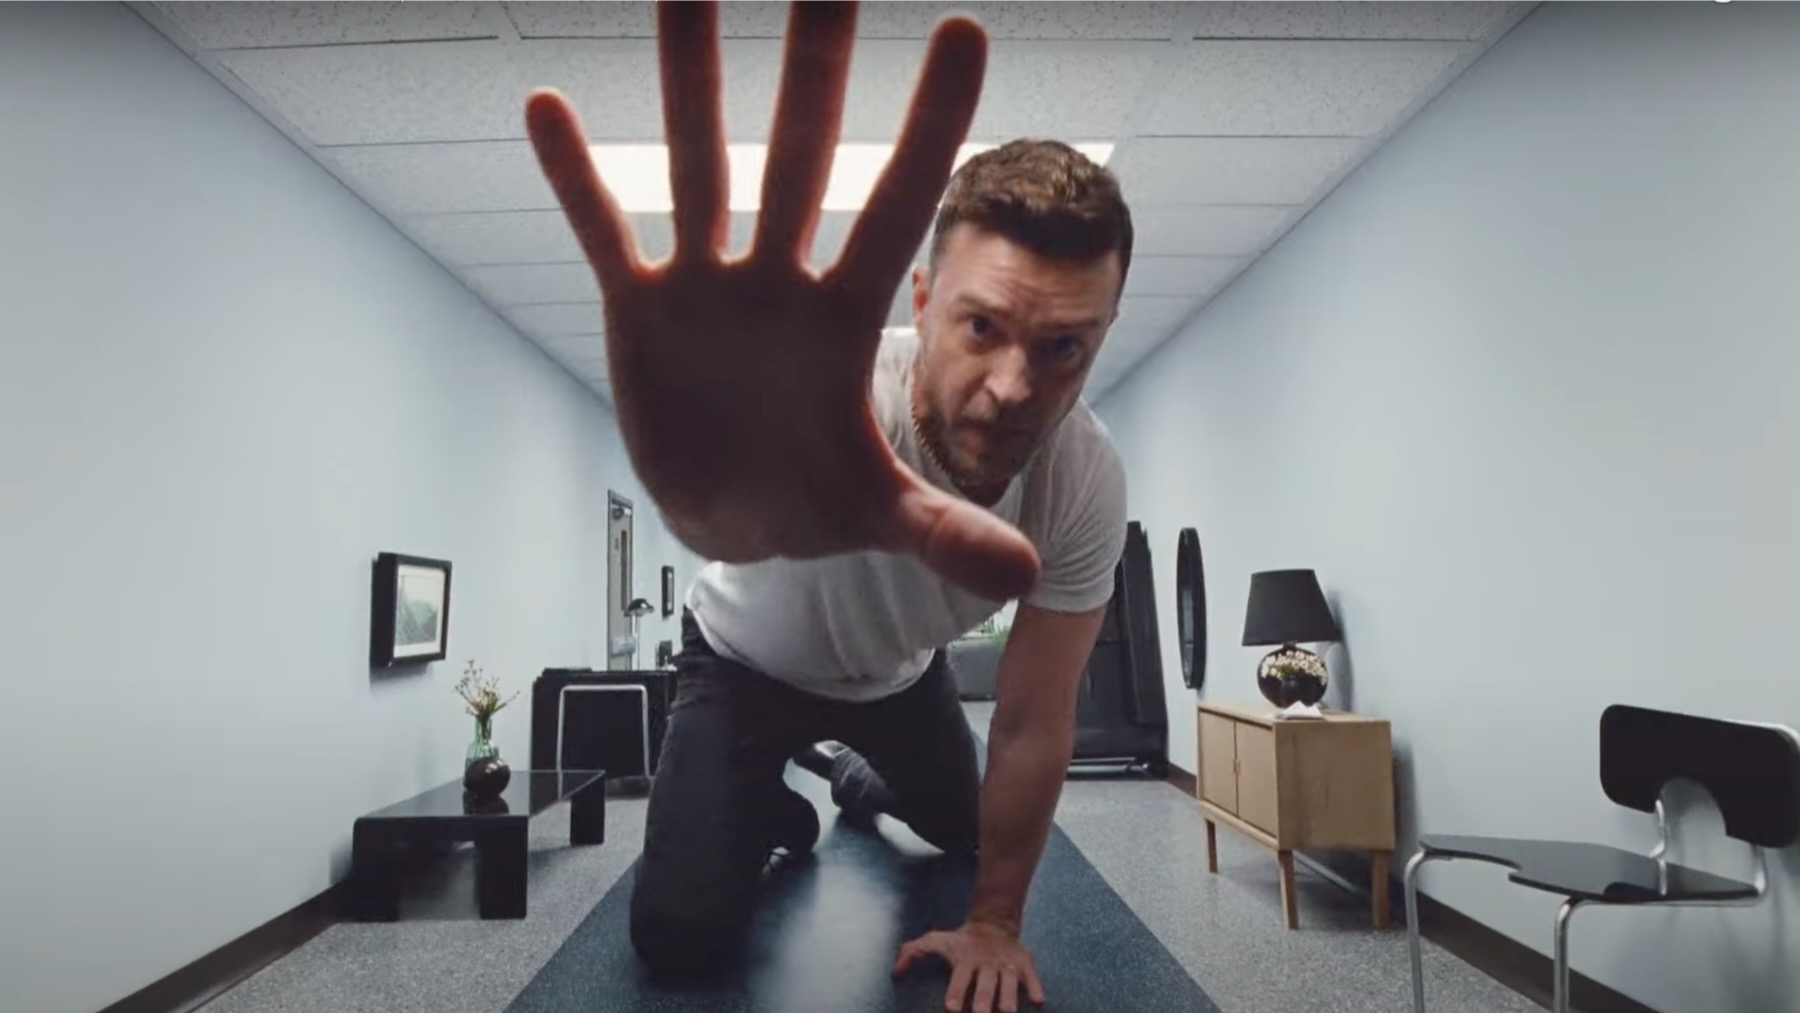 Justin Timberlake Announces Second Leg of “The Forget Tomorrow World Tour” [Updated]